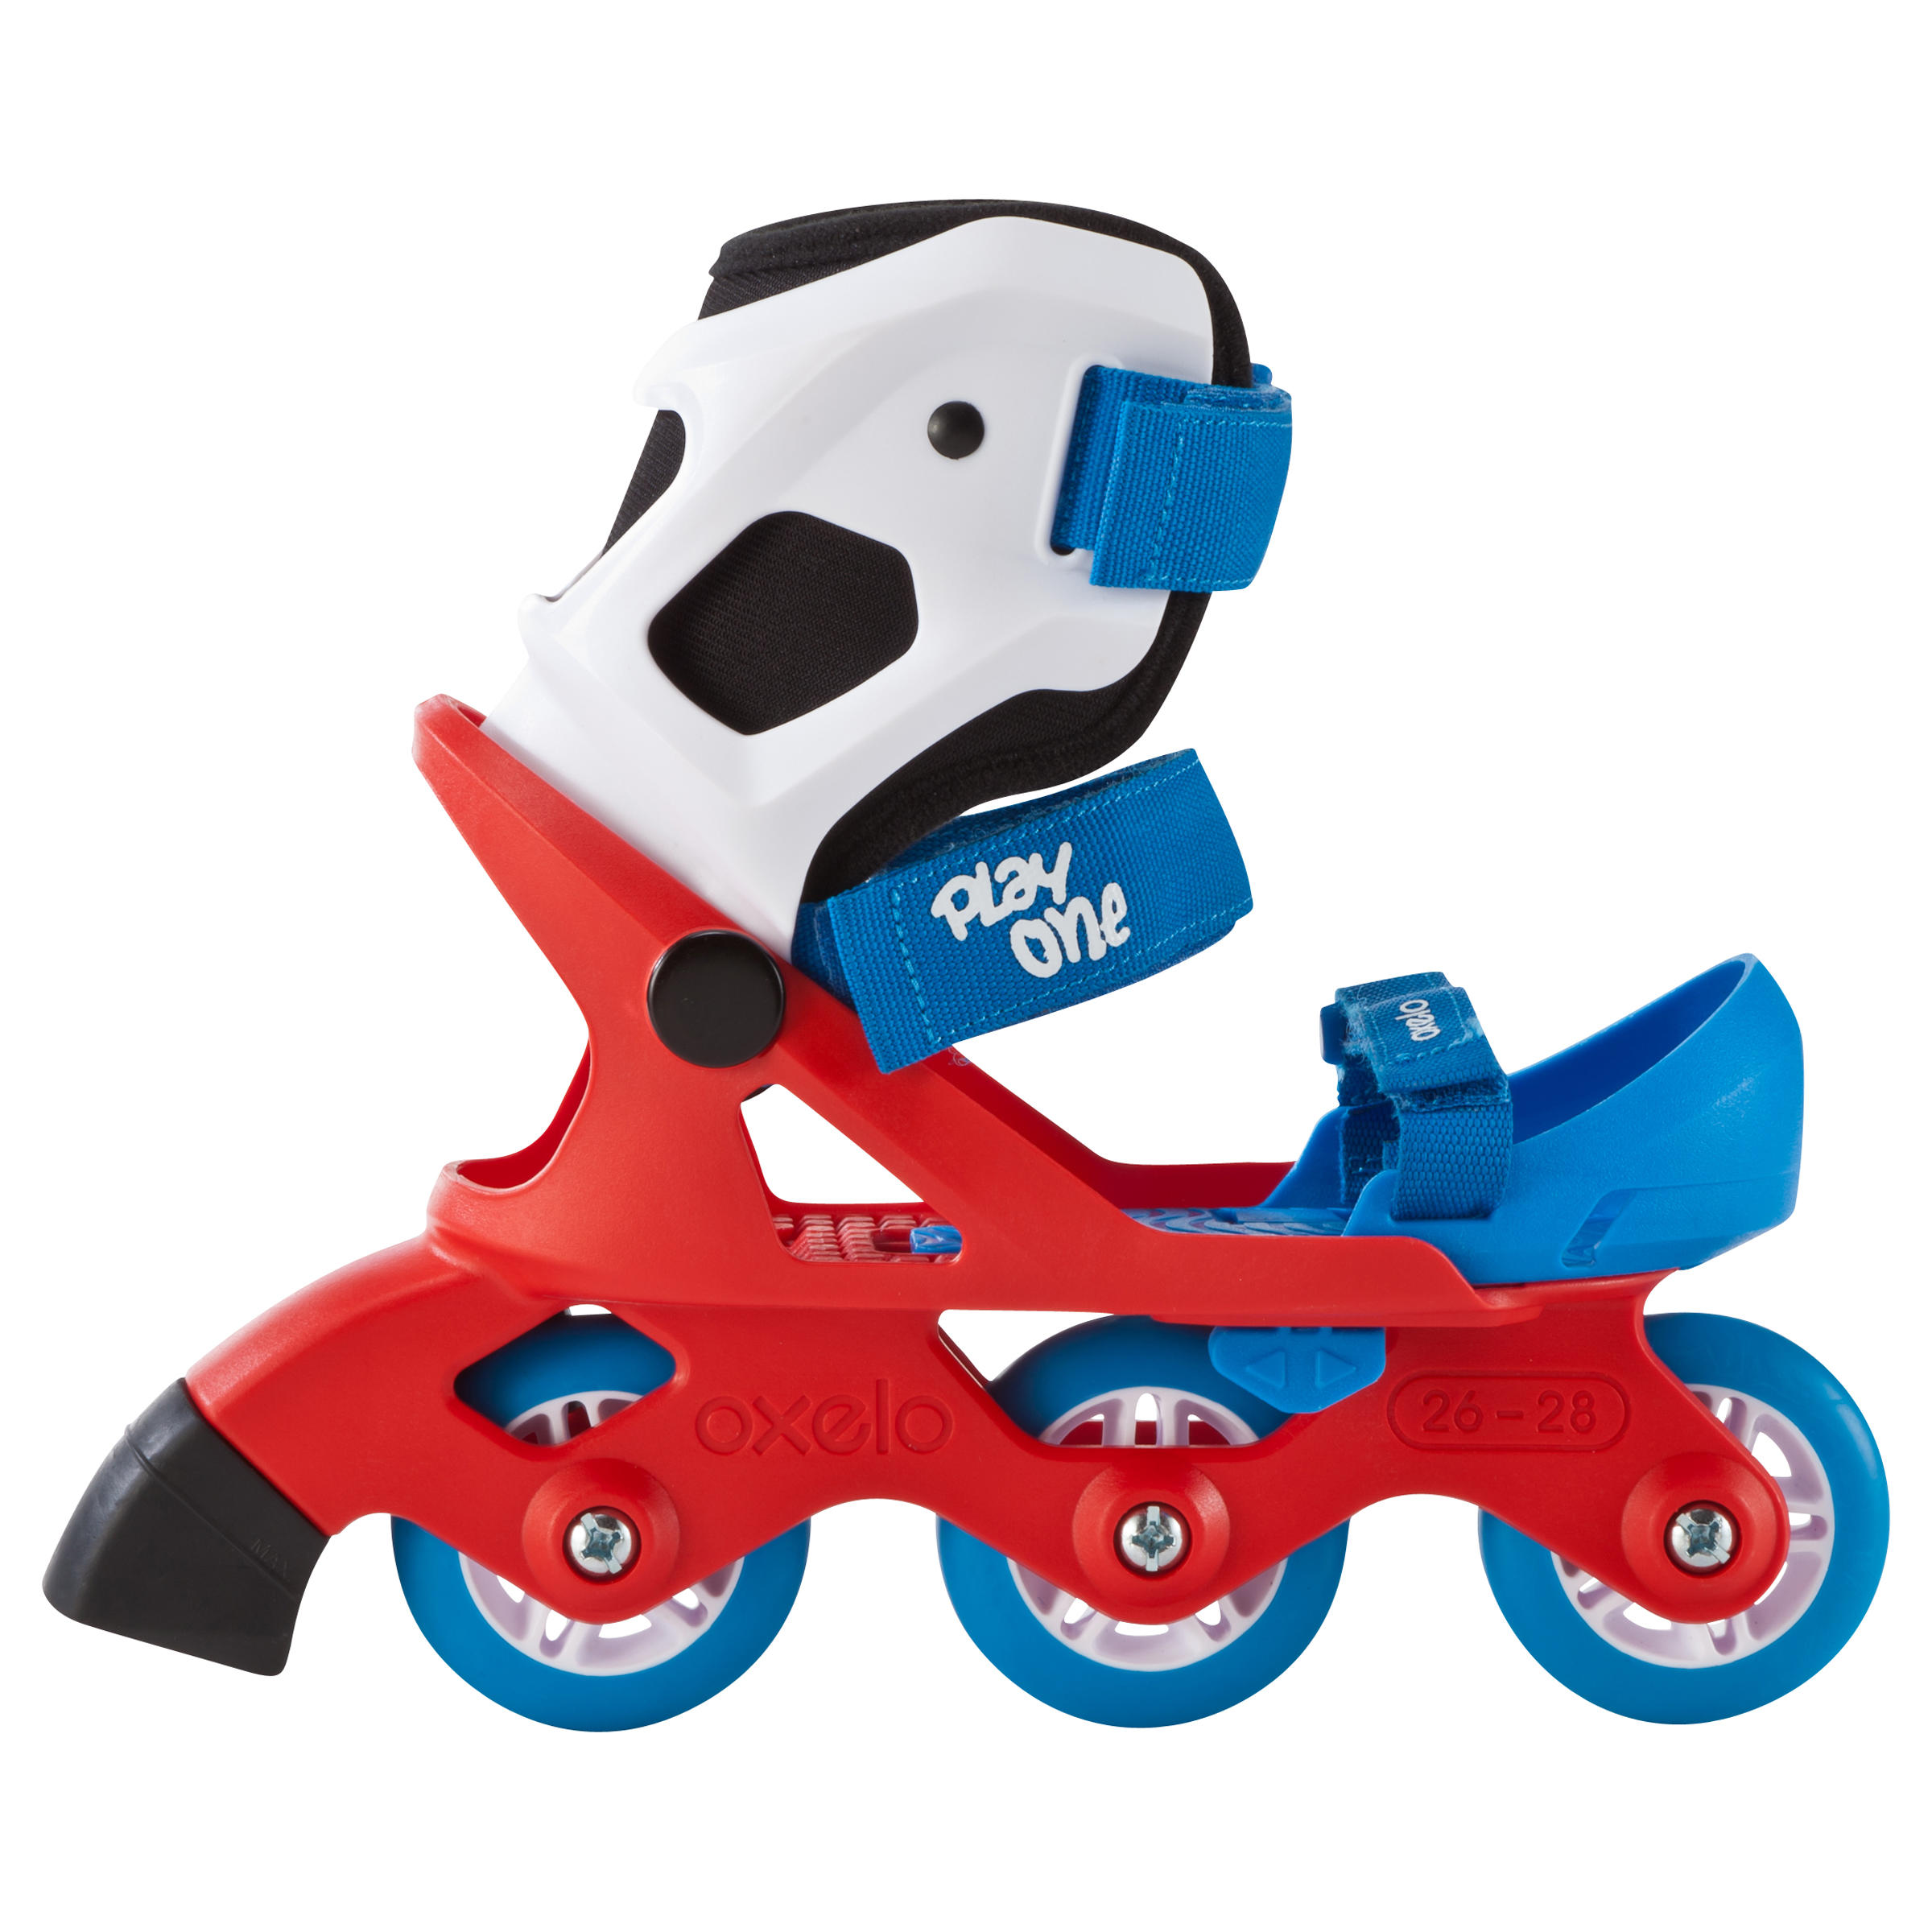 Kids' Inline Skates Play One - Blue/Red